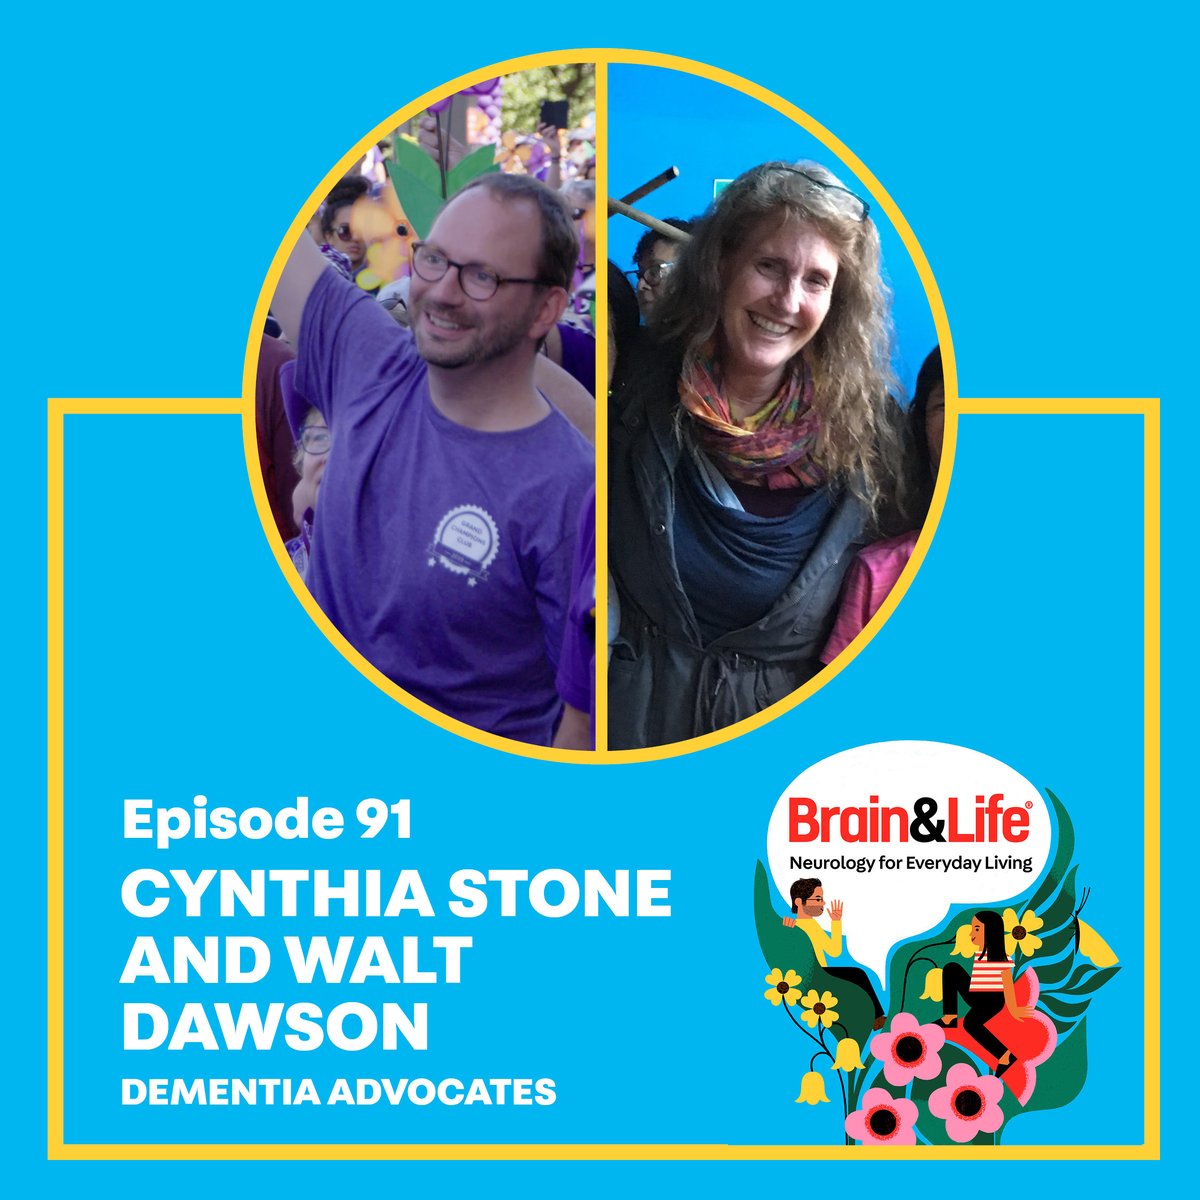 In this week's episode, hear from documentarian Cynthia Stone, and @healthpolicywd, lifelong #Alzheimers advocate and policy expert. Learn how they're finding hope and driving change through Alzheimer's advocacy. bit.ly/3TnF2NO @GBHI_Fellows @NeuroDrCorrea